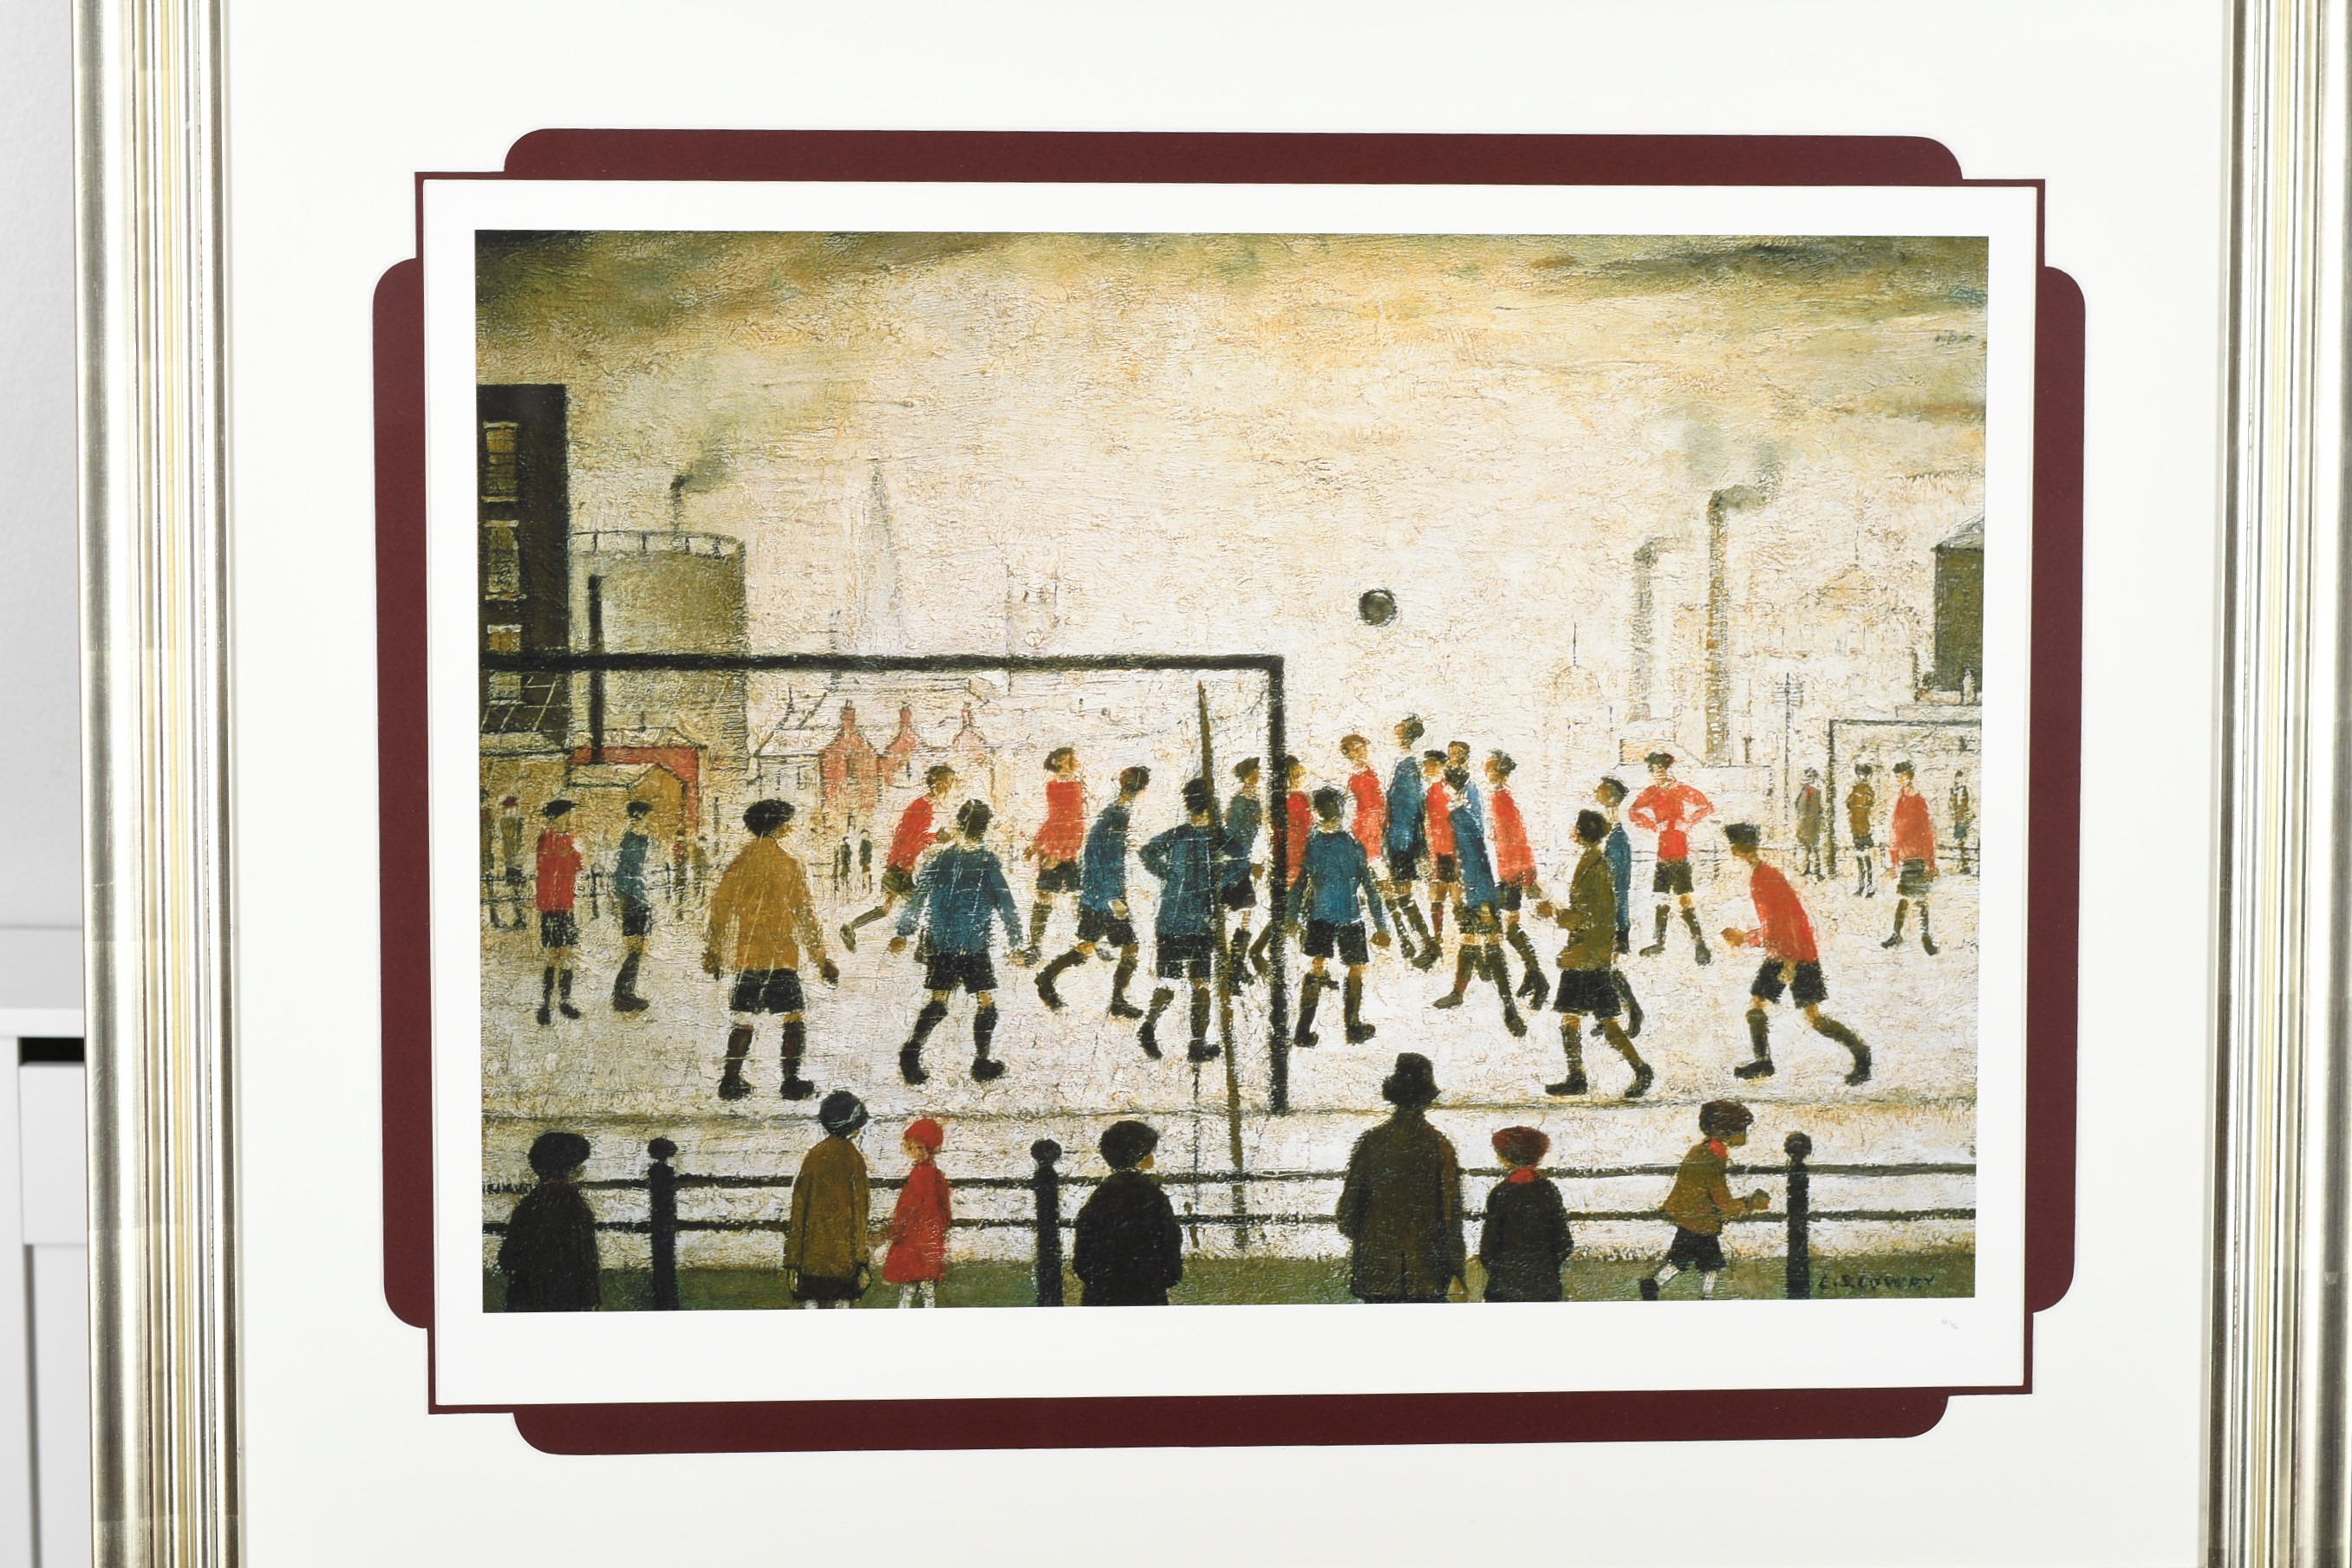 Limited Edition by L.S. Lowry "The Football Match" - Image 10 of 10